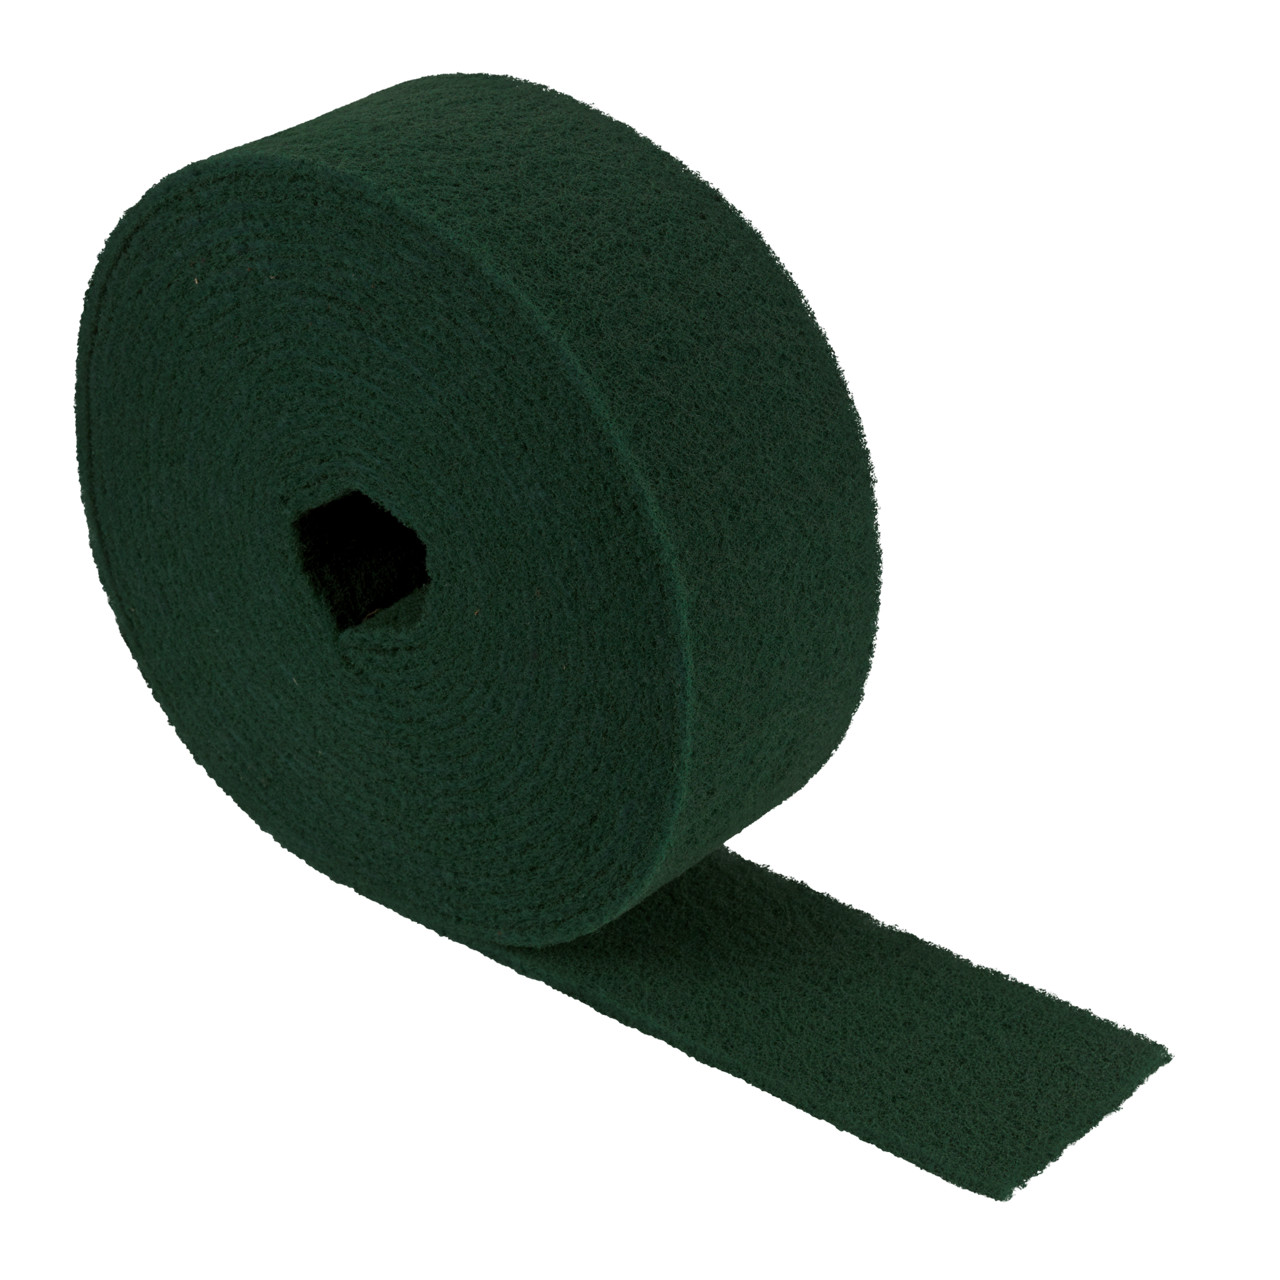 Tyrolit Non-woven rolls TxH 115x10 Universally applicable, A GP - GREEN, Corresponds to P400-500, Form: ROLL, Art. 120716